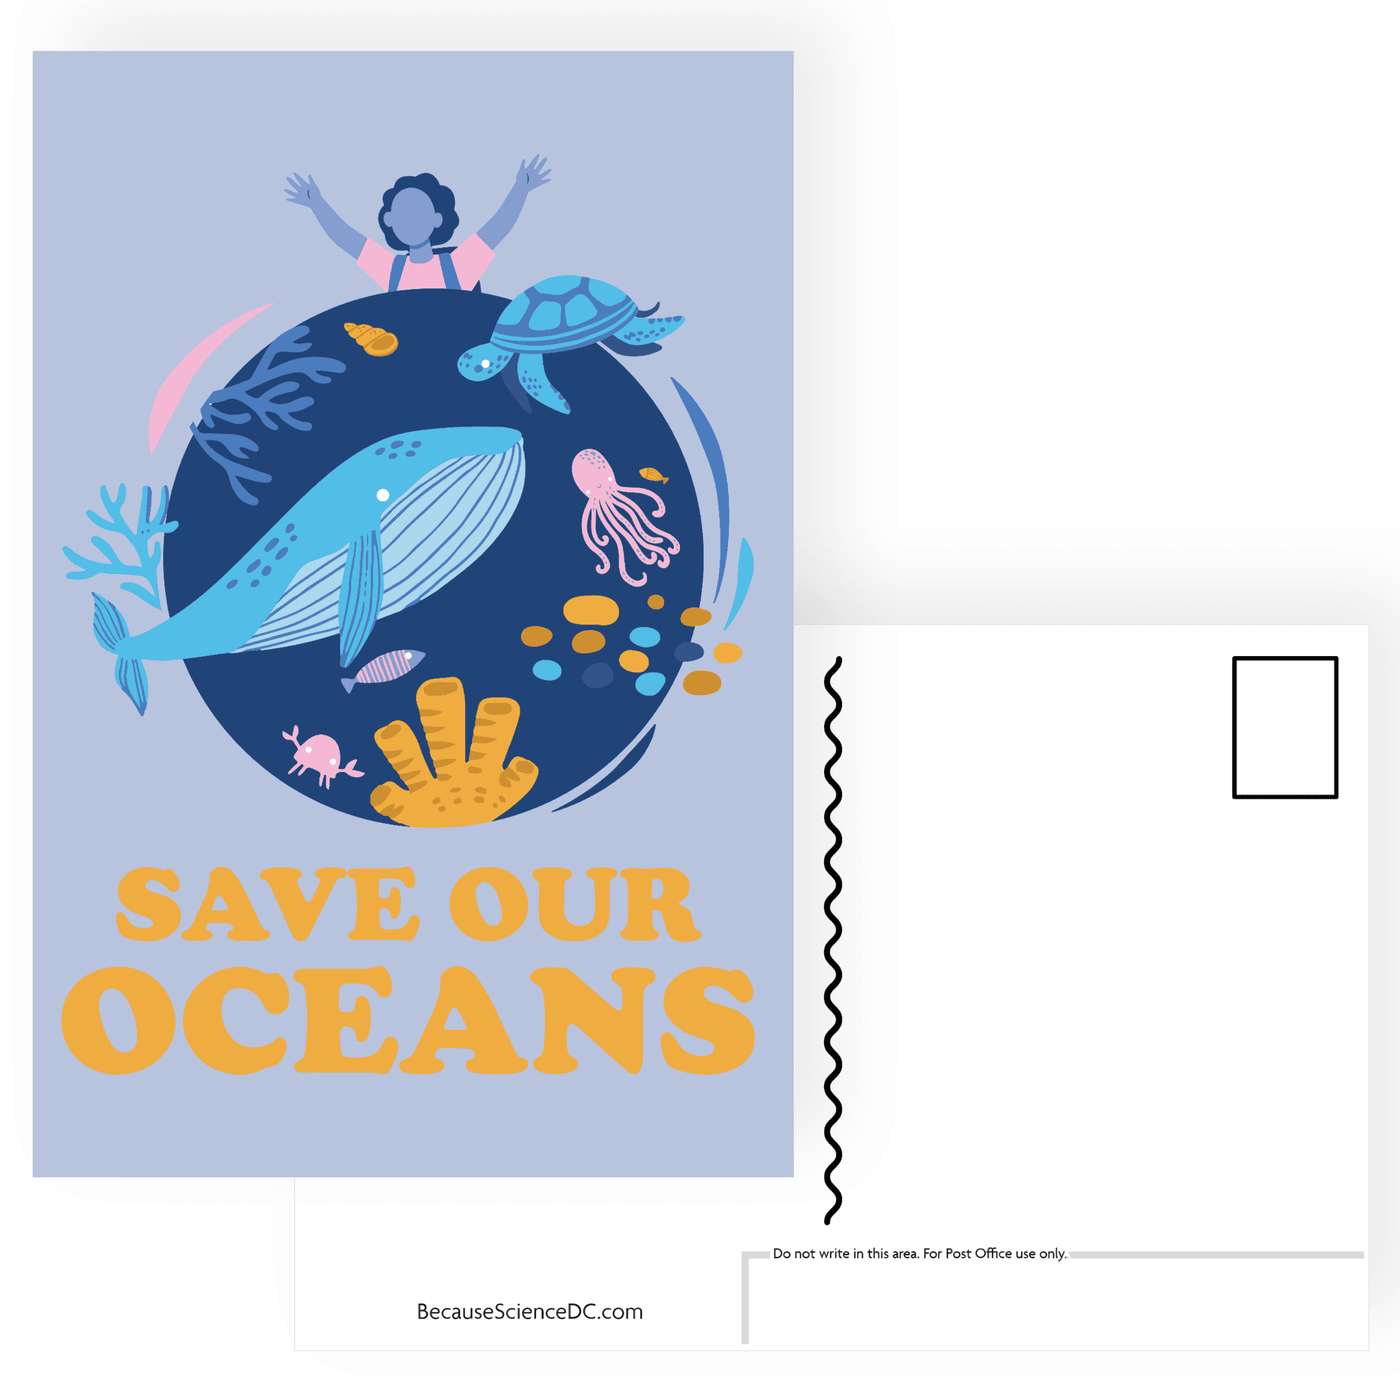 postcard of an ocean scene illustration with text that says save our oceans